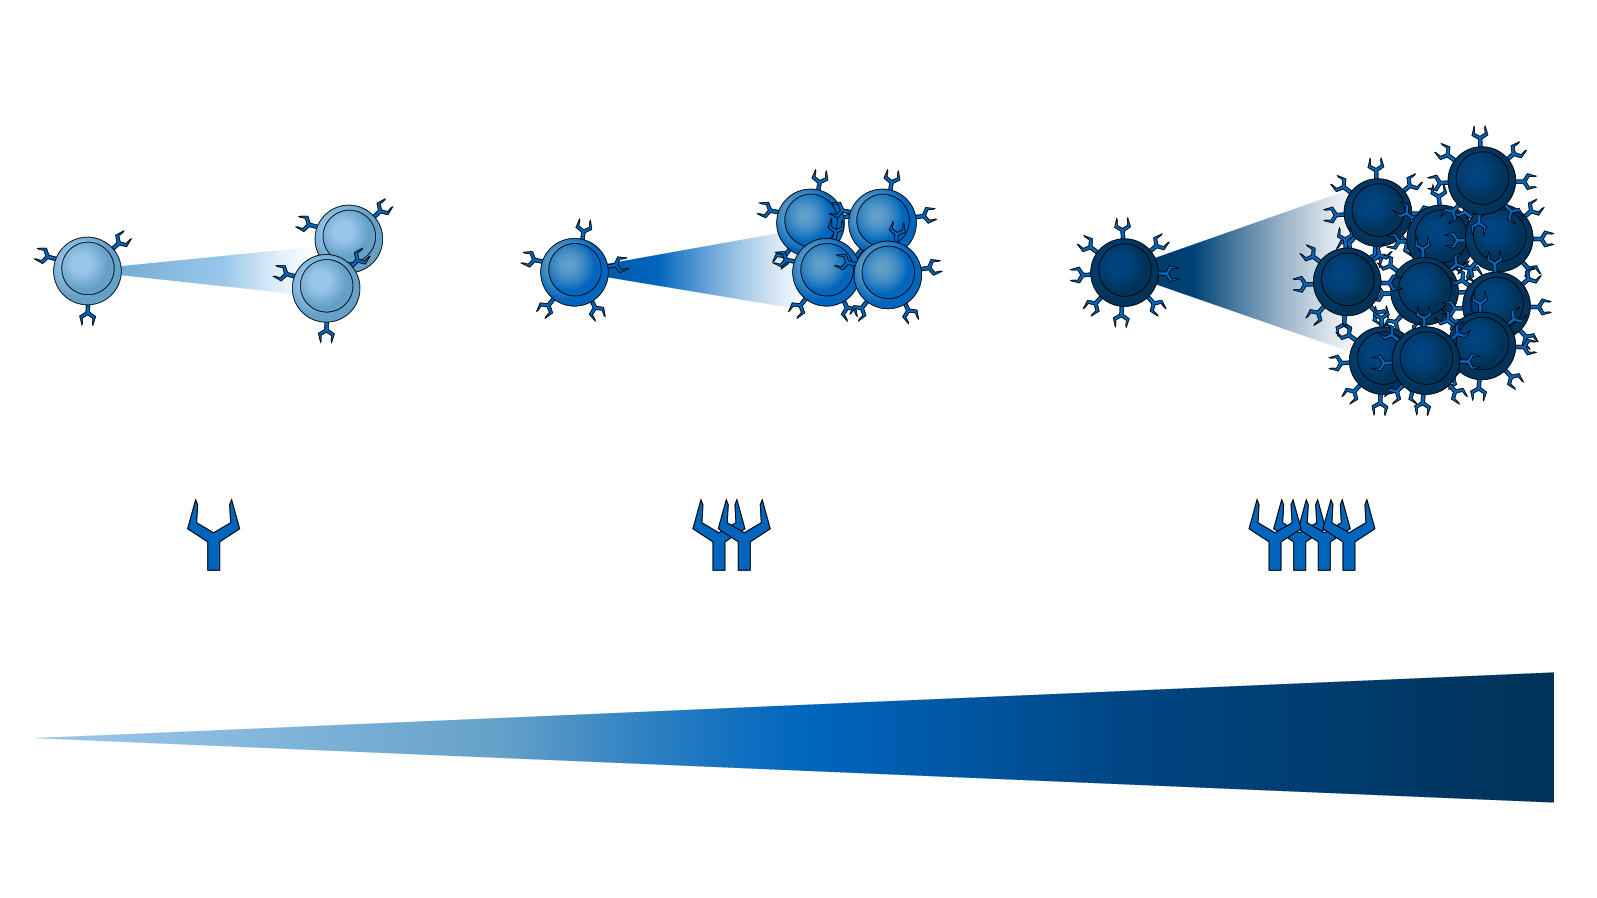 The graphic shows the distribution of the Ly49H-receptor on the surface of different natural killer cells (NK). Depending on the amount of receptors, single cells expand stronger or weaker.